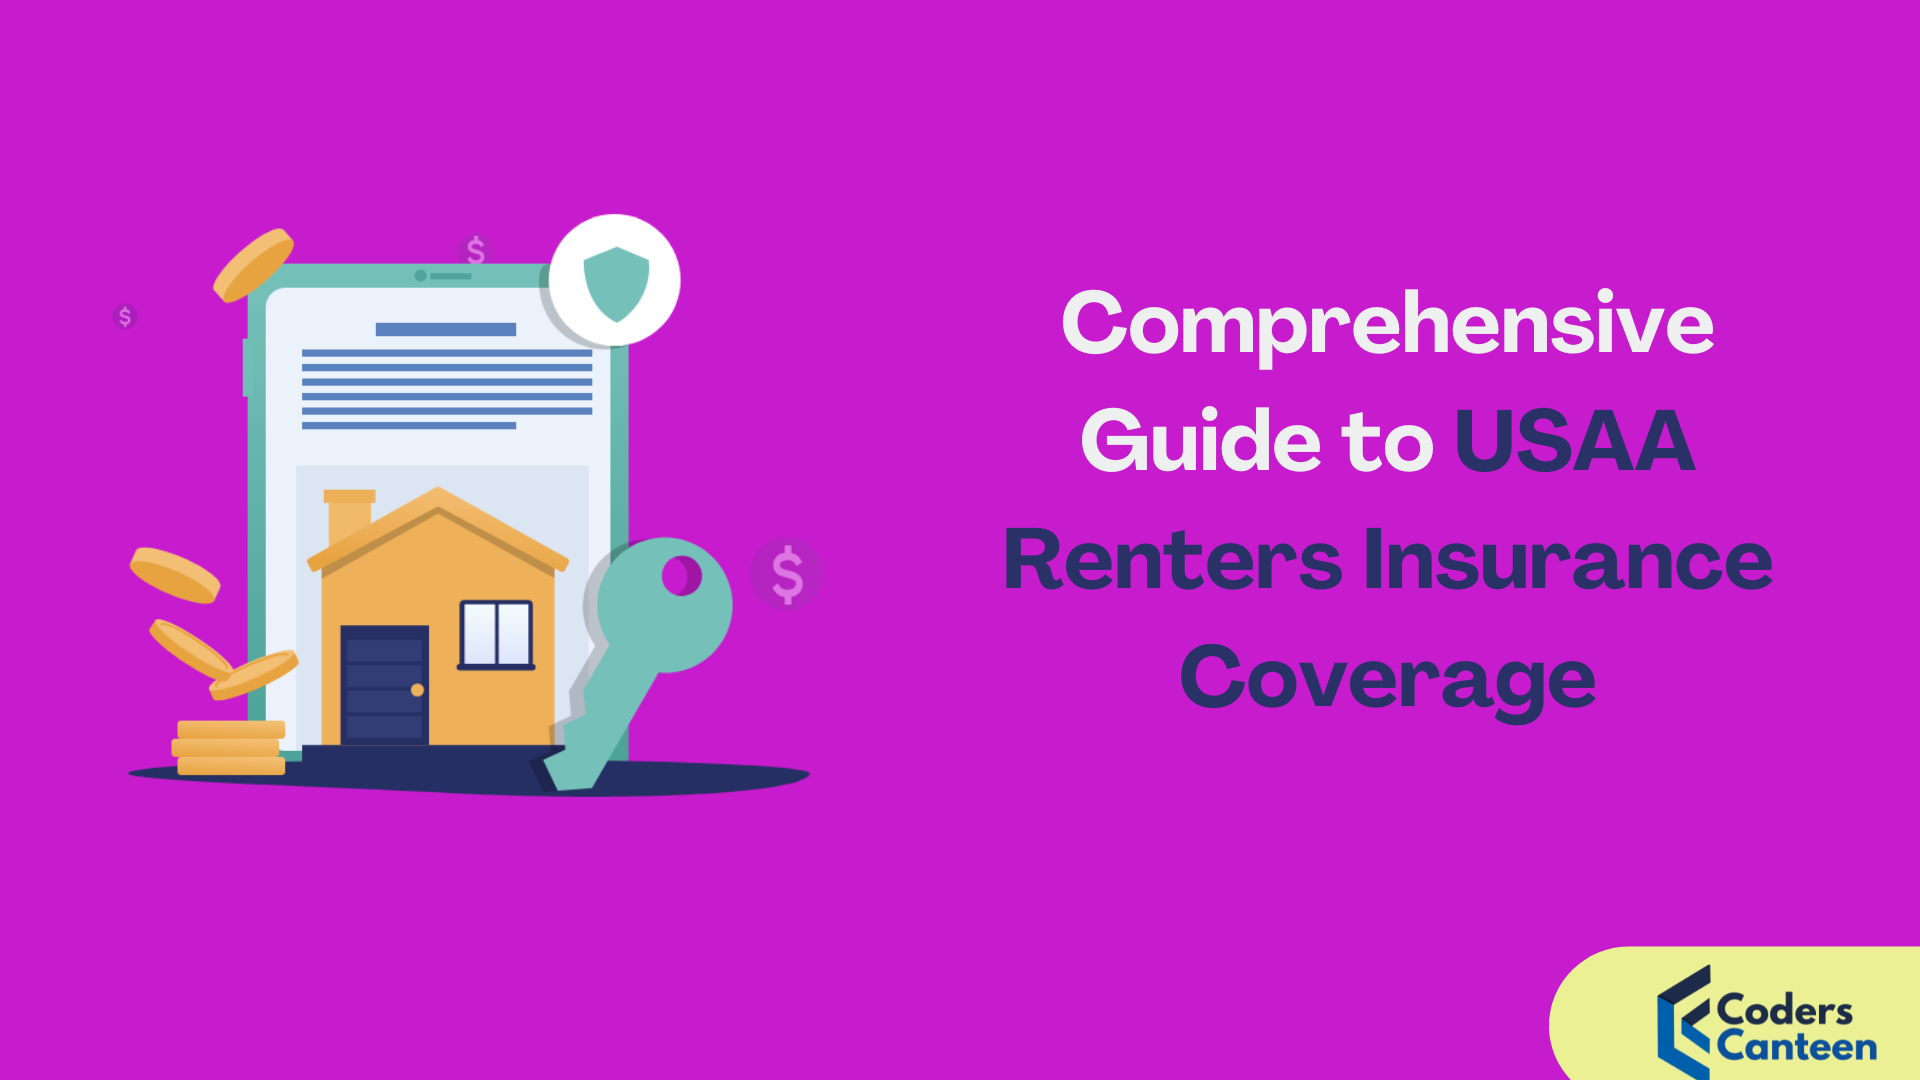 Comprehensive Guide to USAA Renters Insurance Coverage